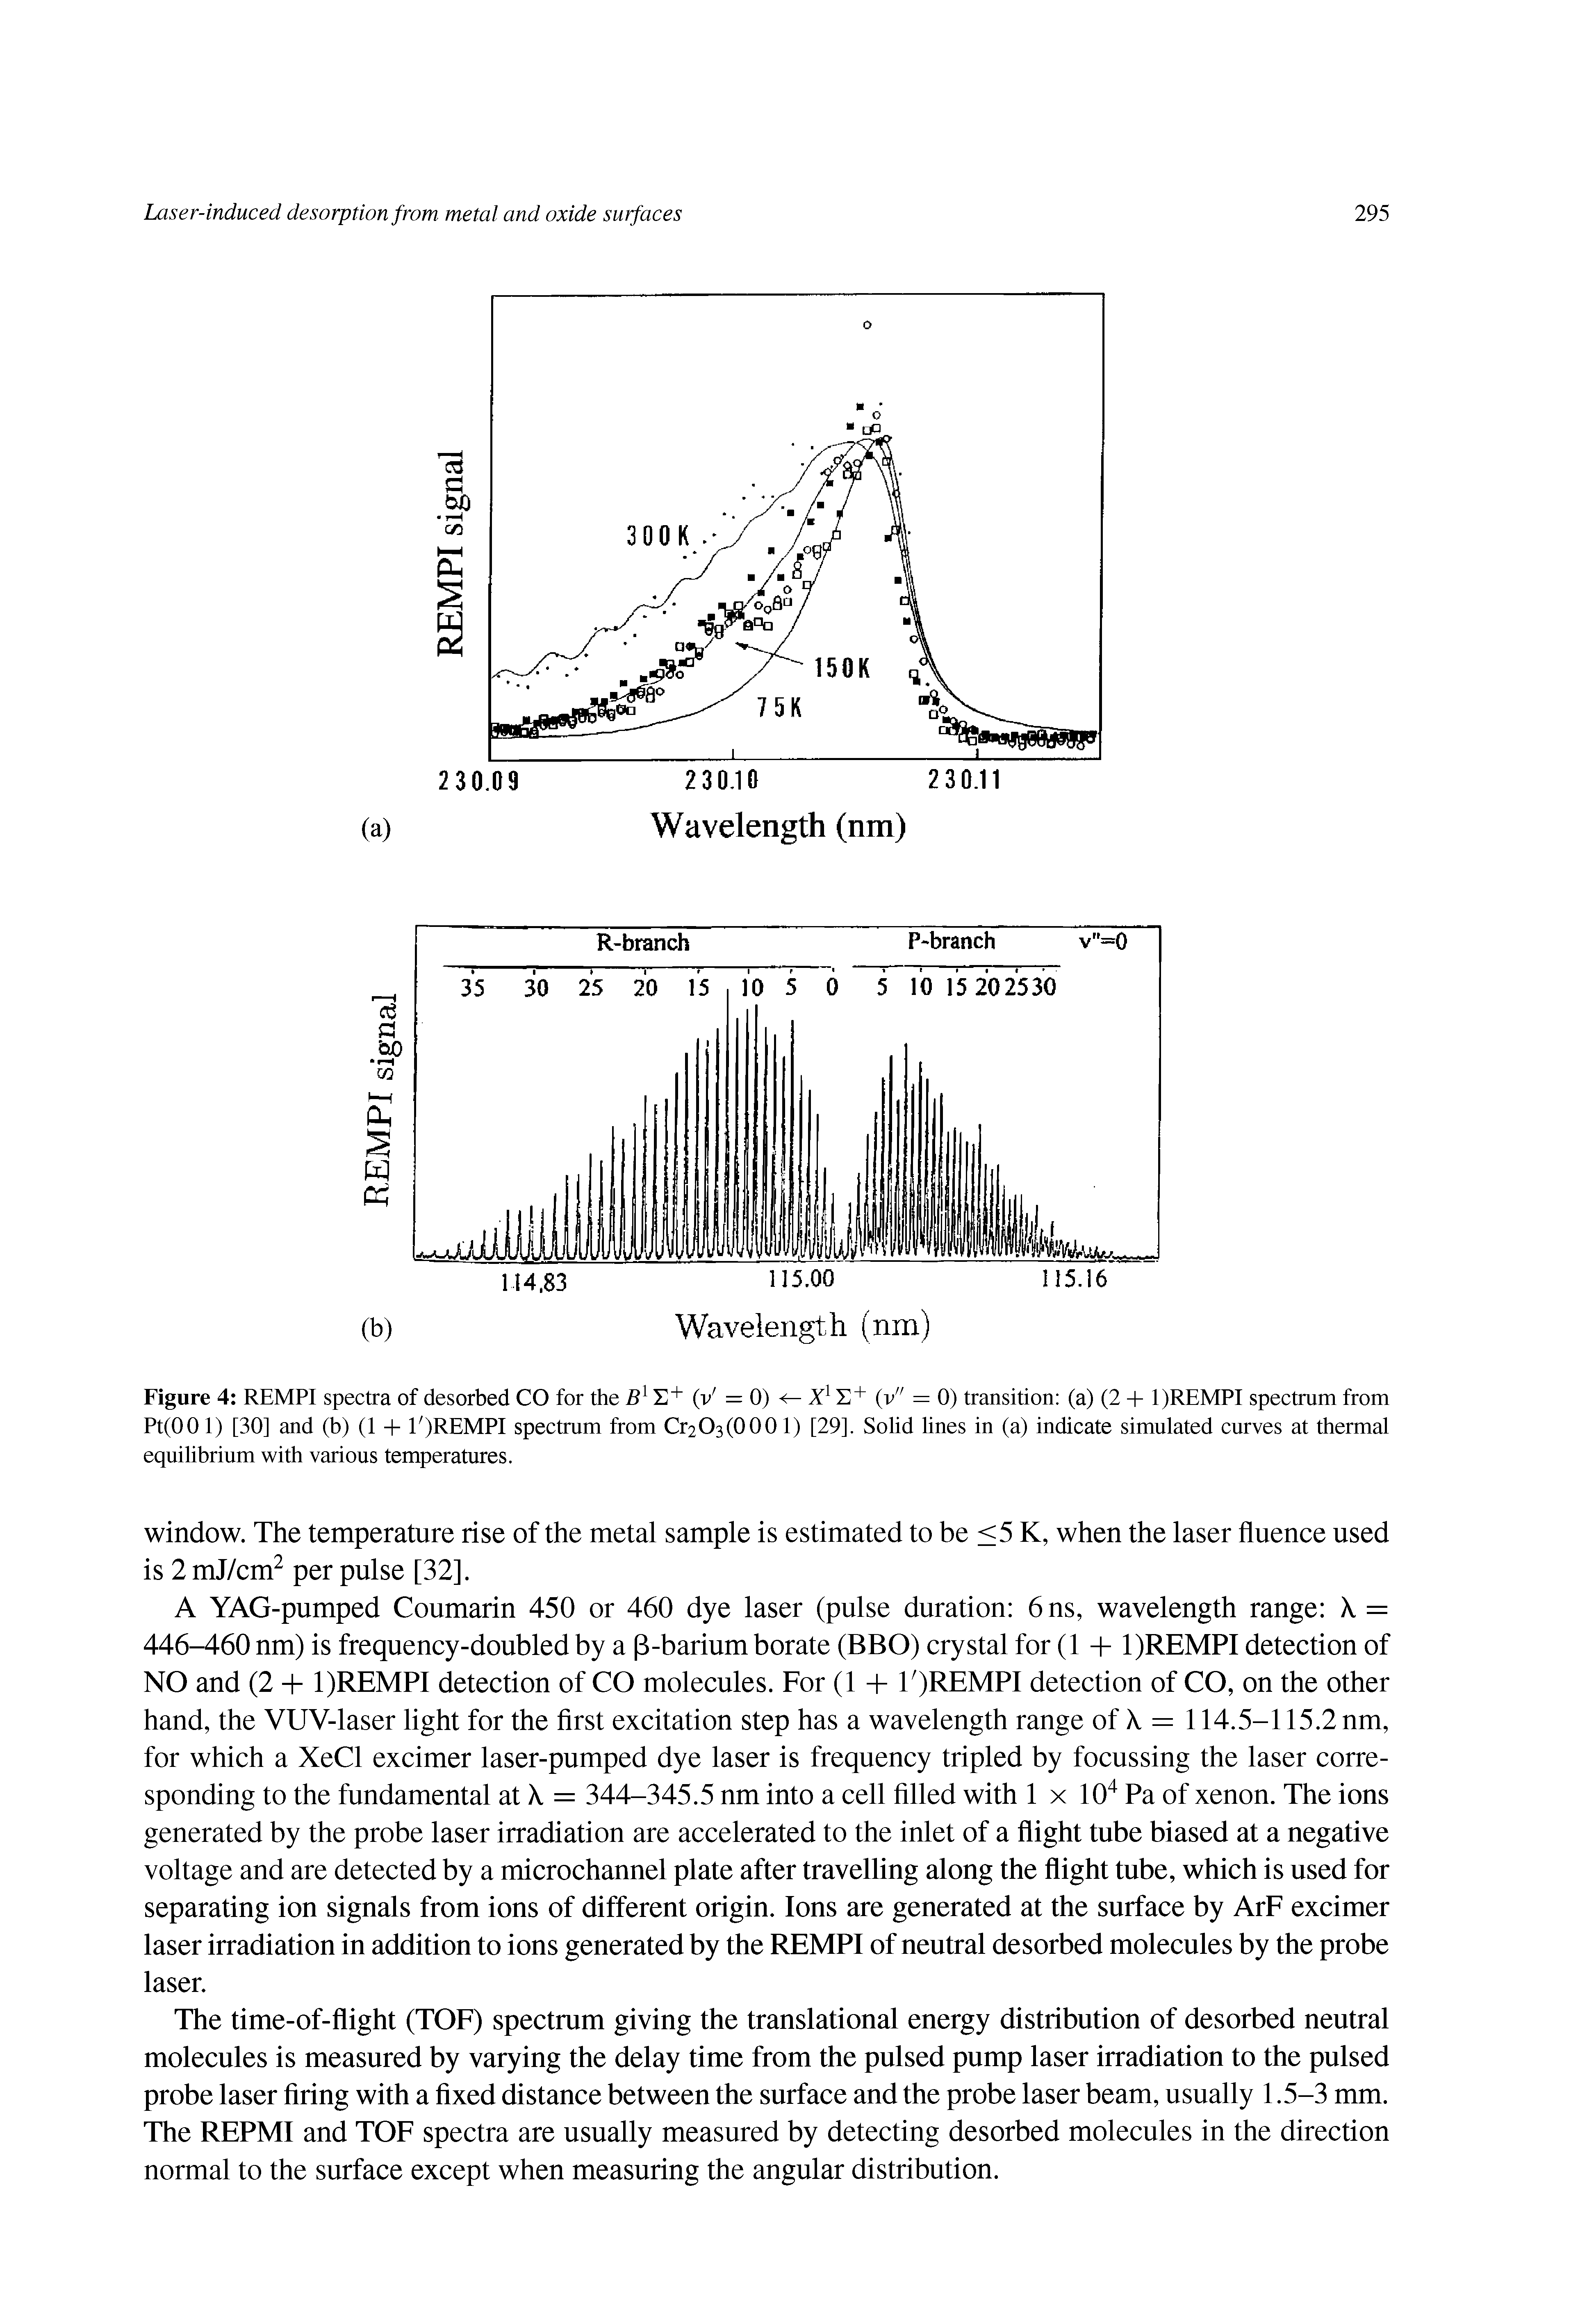 Figure 4 REMPI spectra of desorbed CO for the B1 + (V =0) X1 + (v" = 0) transition (a) (2 + 1)REMPI spectrum from Pt(00 1) [30] and (b) (1 + E)REMPI spectrum from 0 03 (000 1) [29], Solid lines in (a) indicate simulated curves at thermal equilibrium with various temperatures.